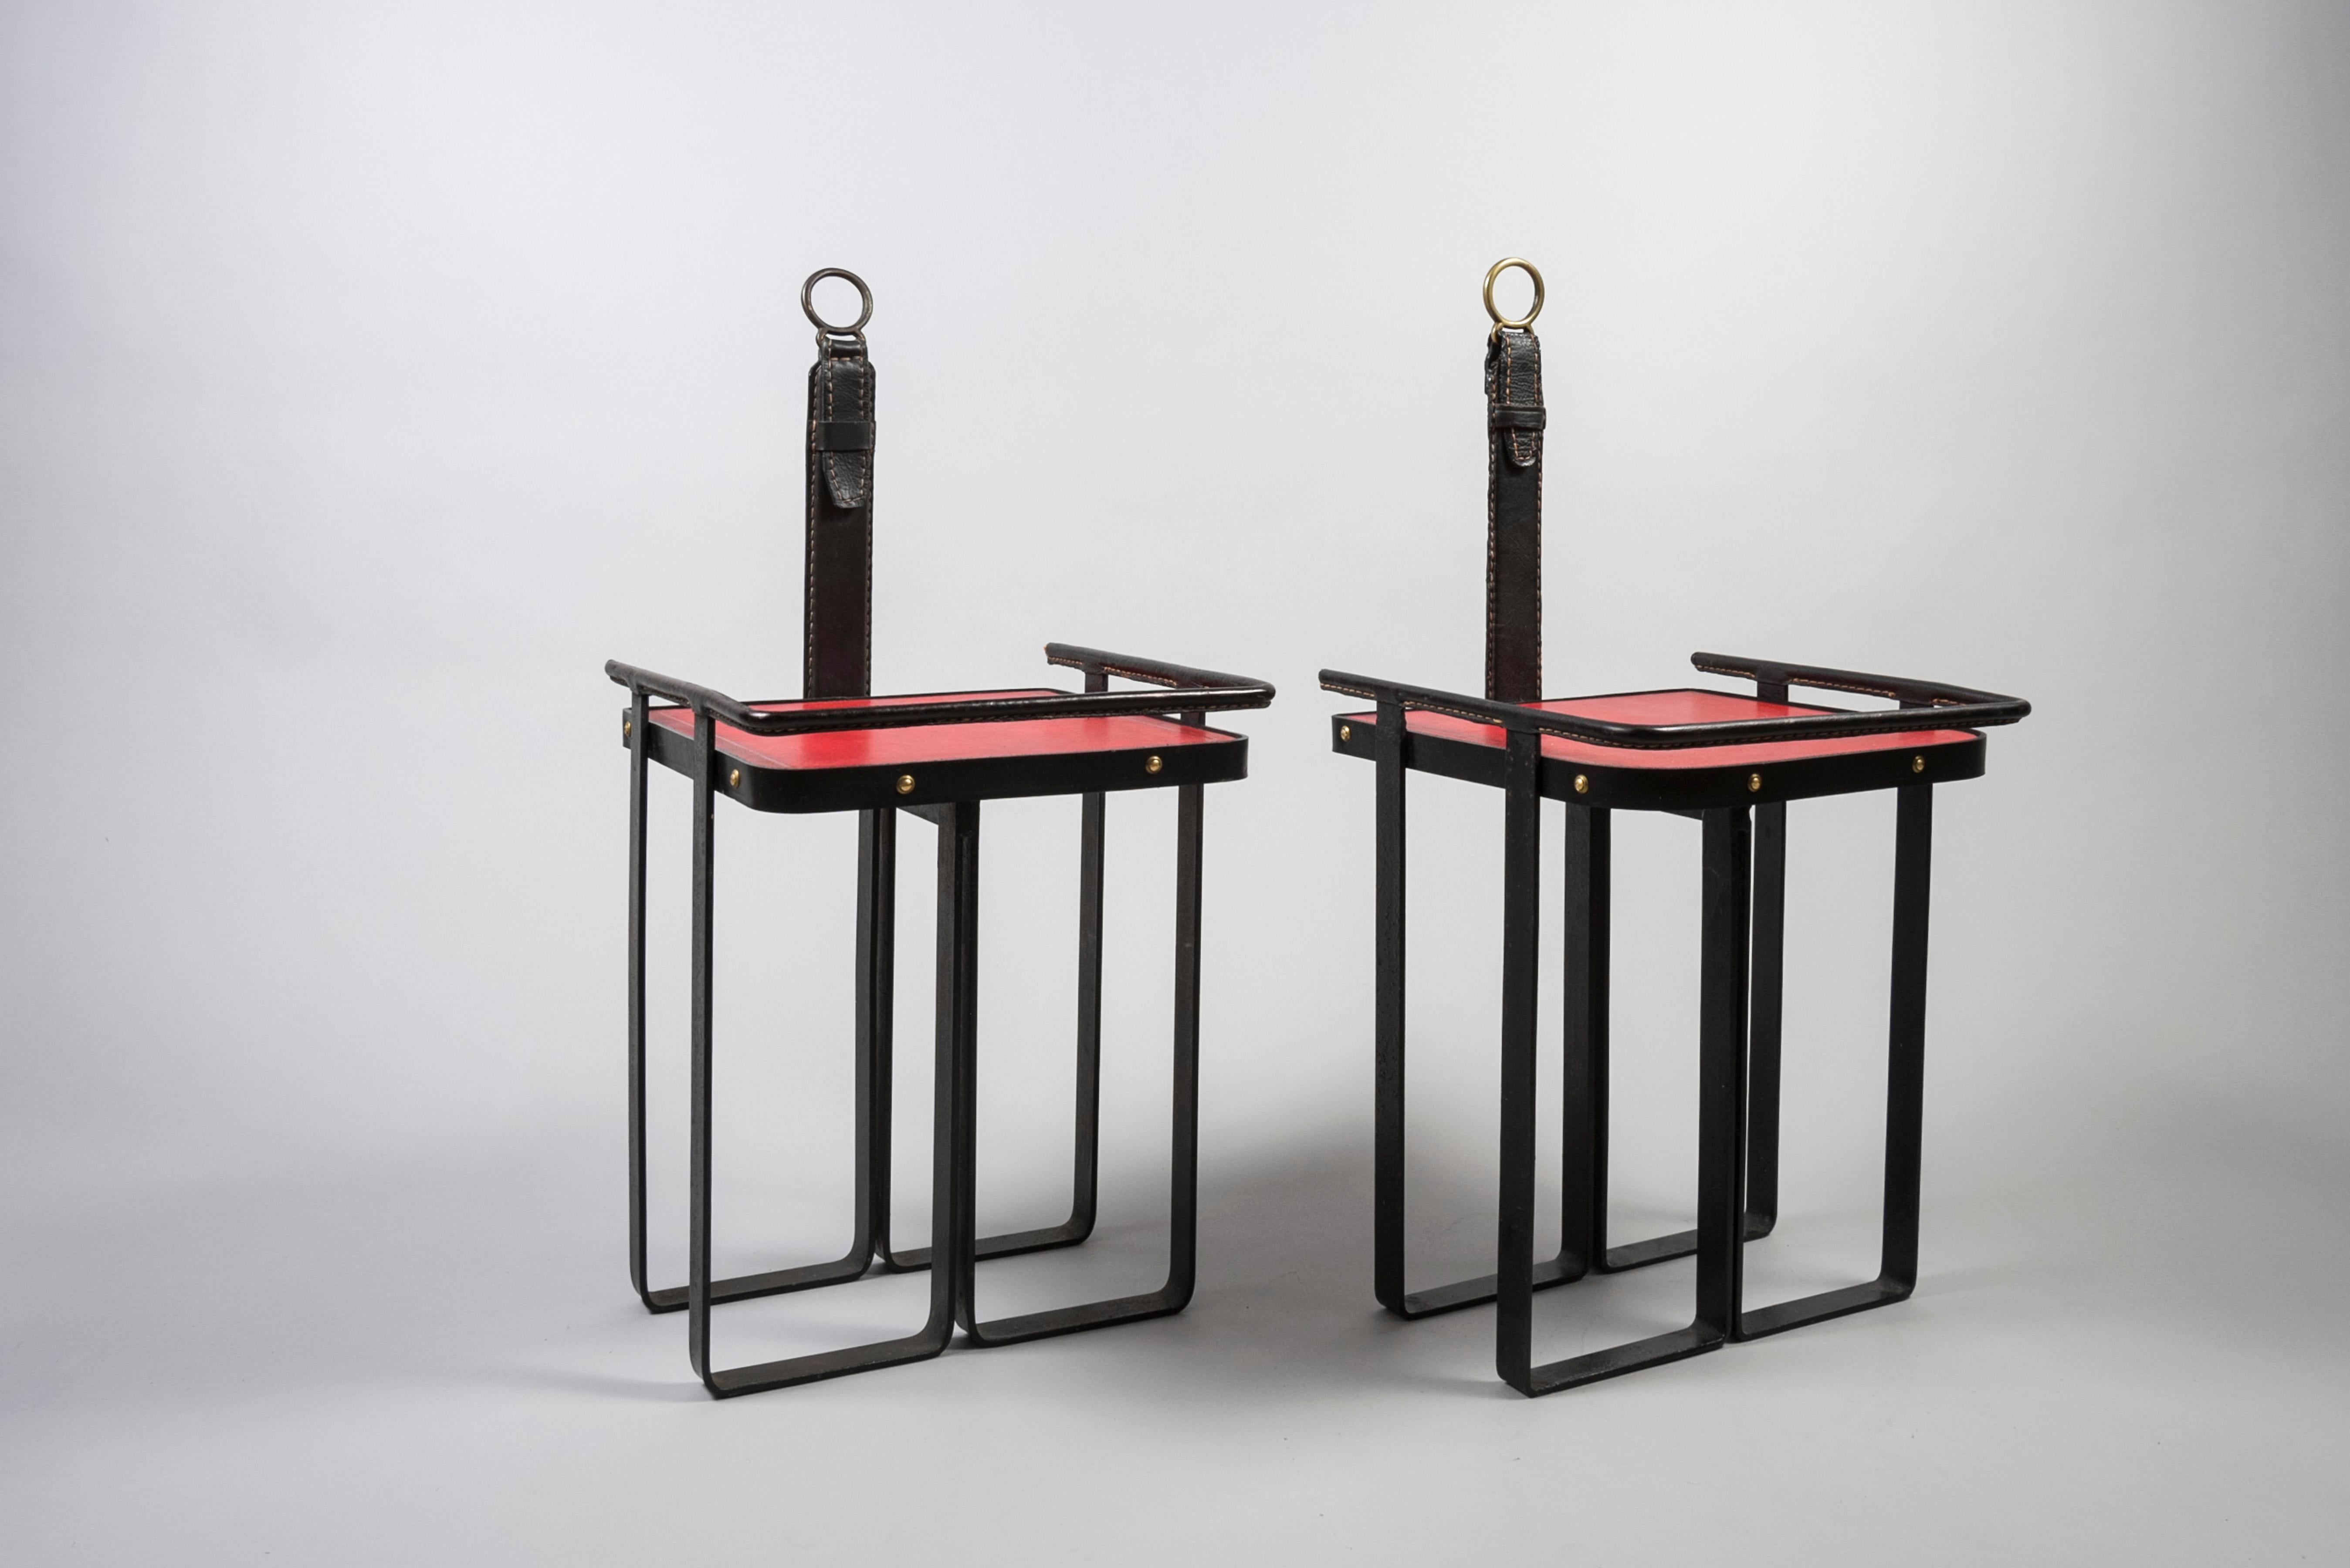 1950's stitched leather side tables by Jacques Adnet
Rare in this combination of colors.
 